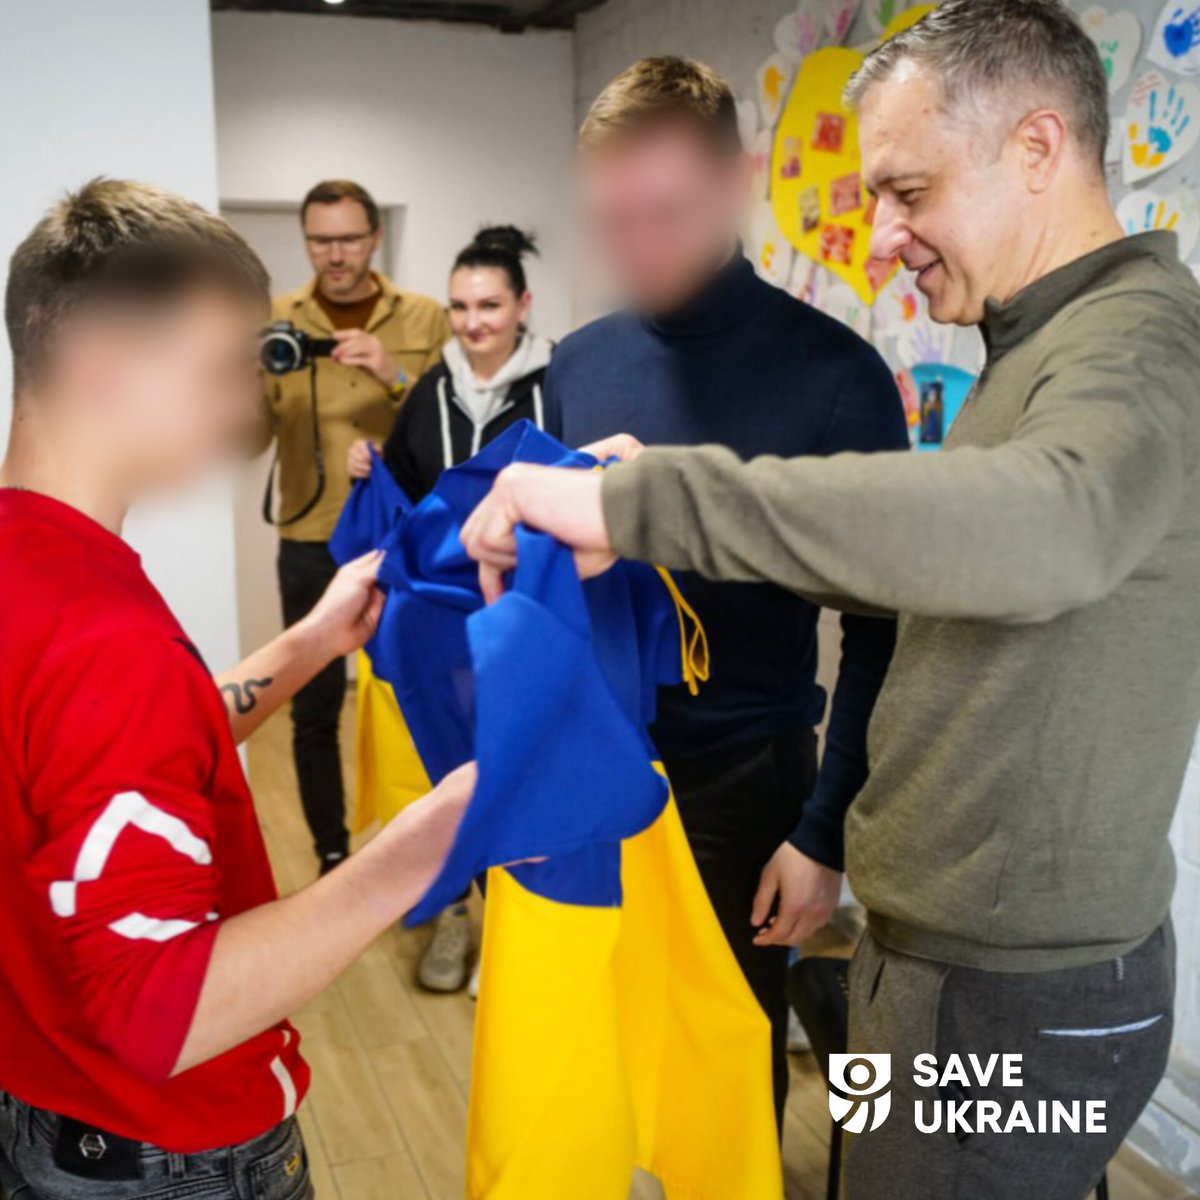 The @SaveukraineUs team managed to save five children, including three orphans, from the #Russian occupation. This 17th mission is going particularly hard because we are dealing with a country that is trying in every possible way to terrorize Ukrainians. Fortunately, everything…